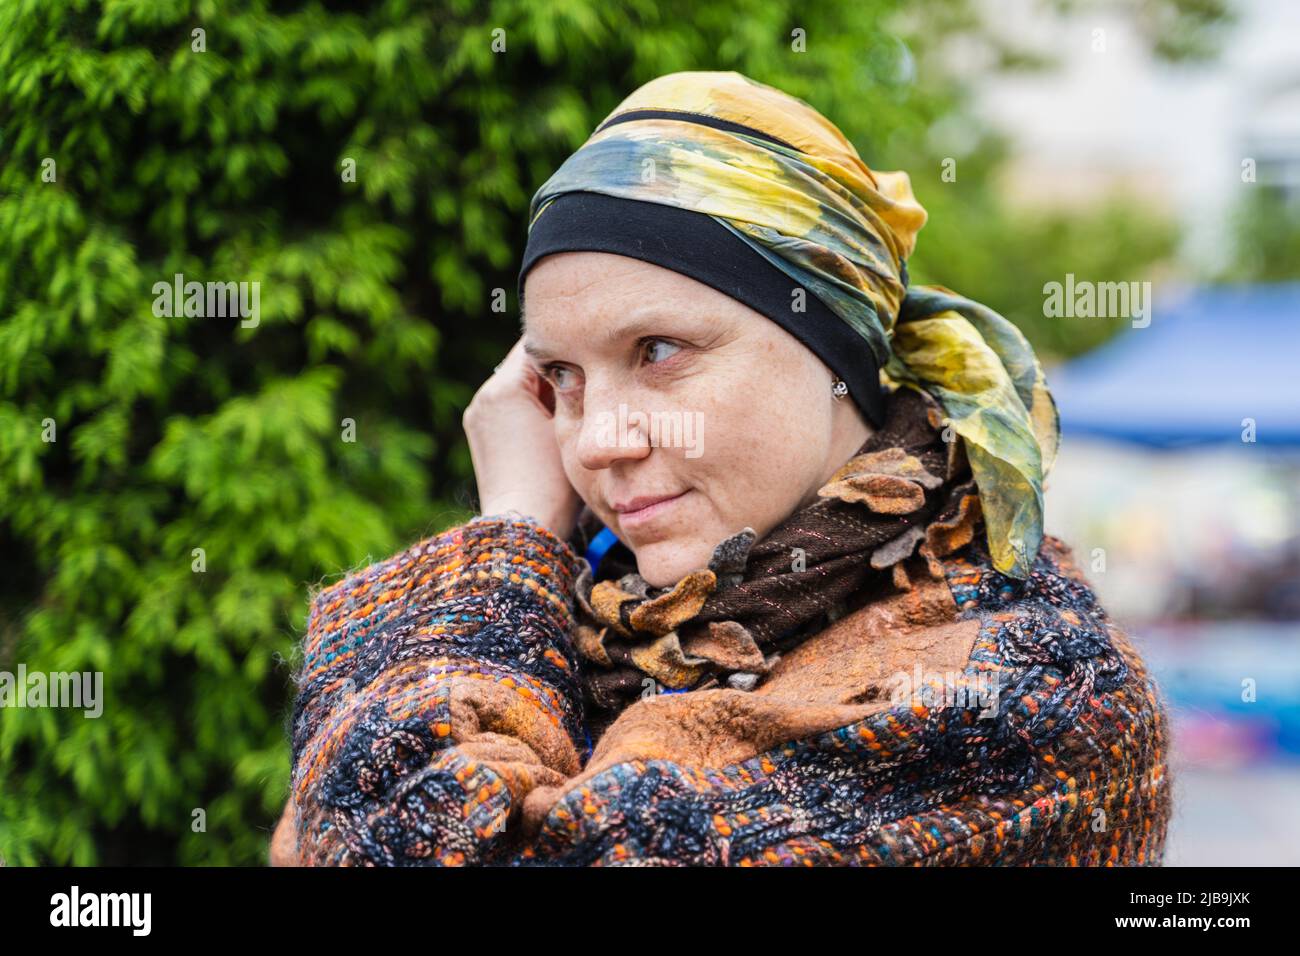 Vladivostok, Russia. 4th June, 2022. A craftswoman uses her plant-dyed headscarf to imitate the famous painting 'Girl with a Pearl Earring' on a street in Vladivostok, Russia, June 4, 2022. In order to protect and develop traditional Russian handicrafts, the city government of Vladivostok provides a free place for craftsmen to display and sell their homemade handicrafts in the city center. Credit: Guo Feizhou/Xinhua/Alamy Live News Stock Photo